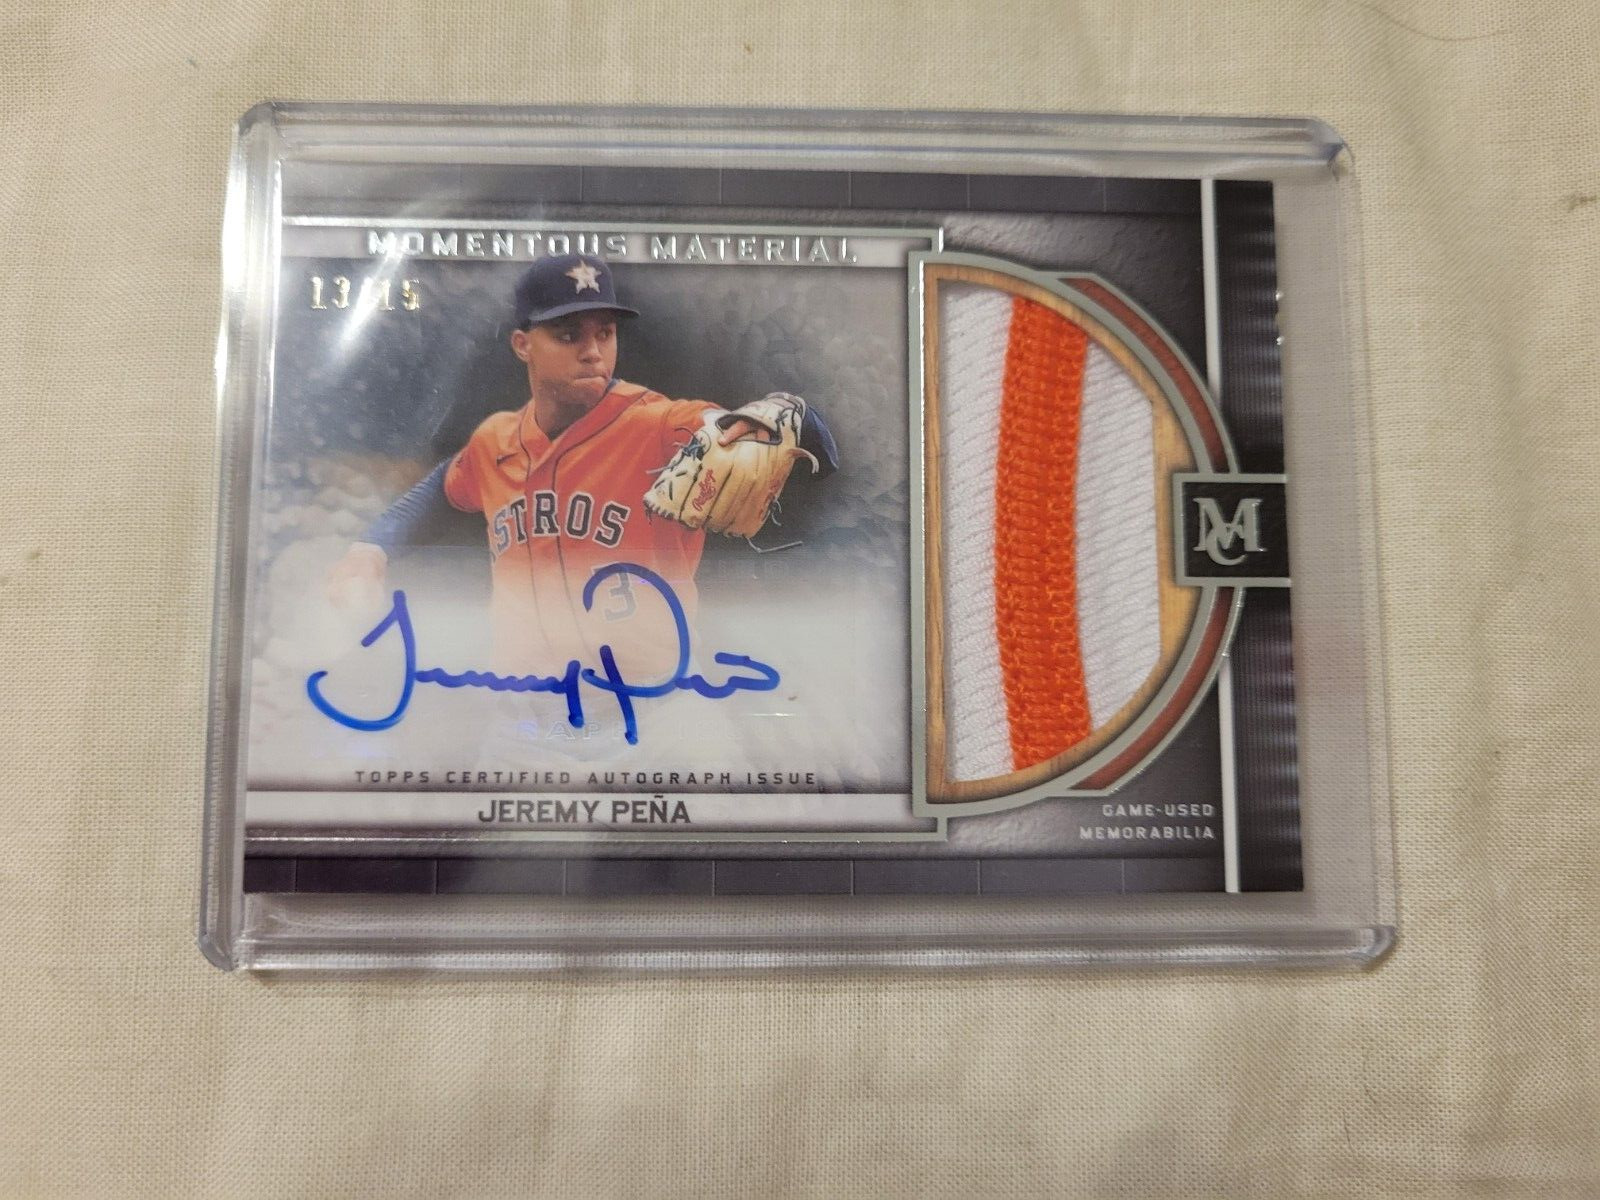 2023 TOPPS MUSEUM COLLECTION JEREMY PENA JUMBO PATCH AUTOGRAPH #13/15 AUTO